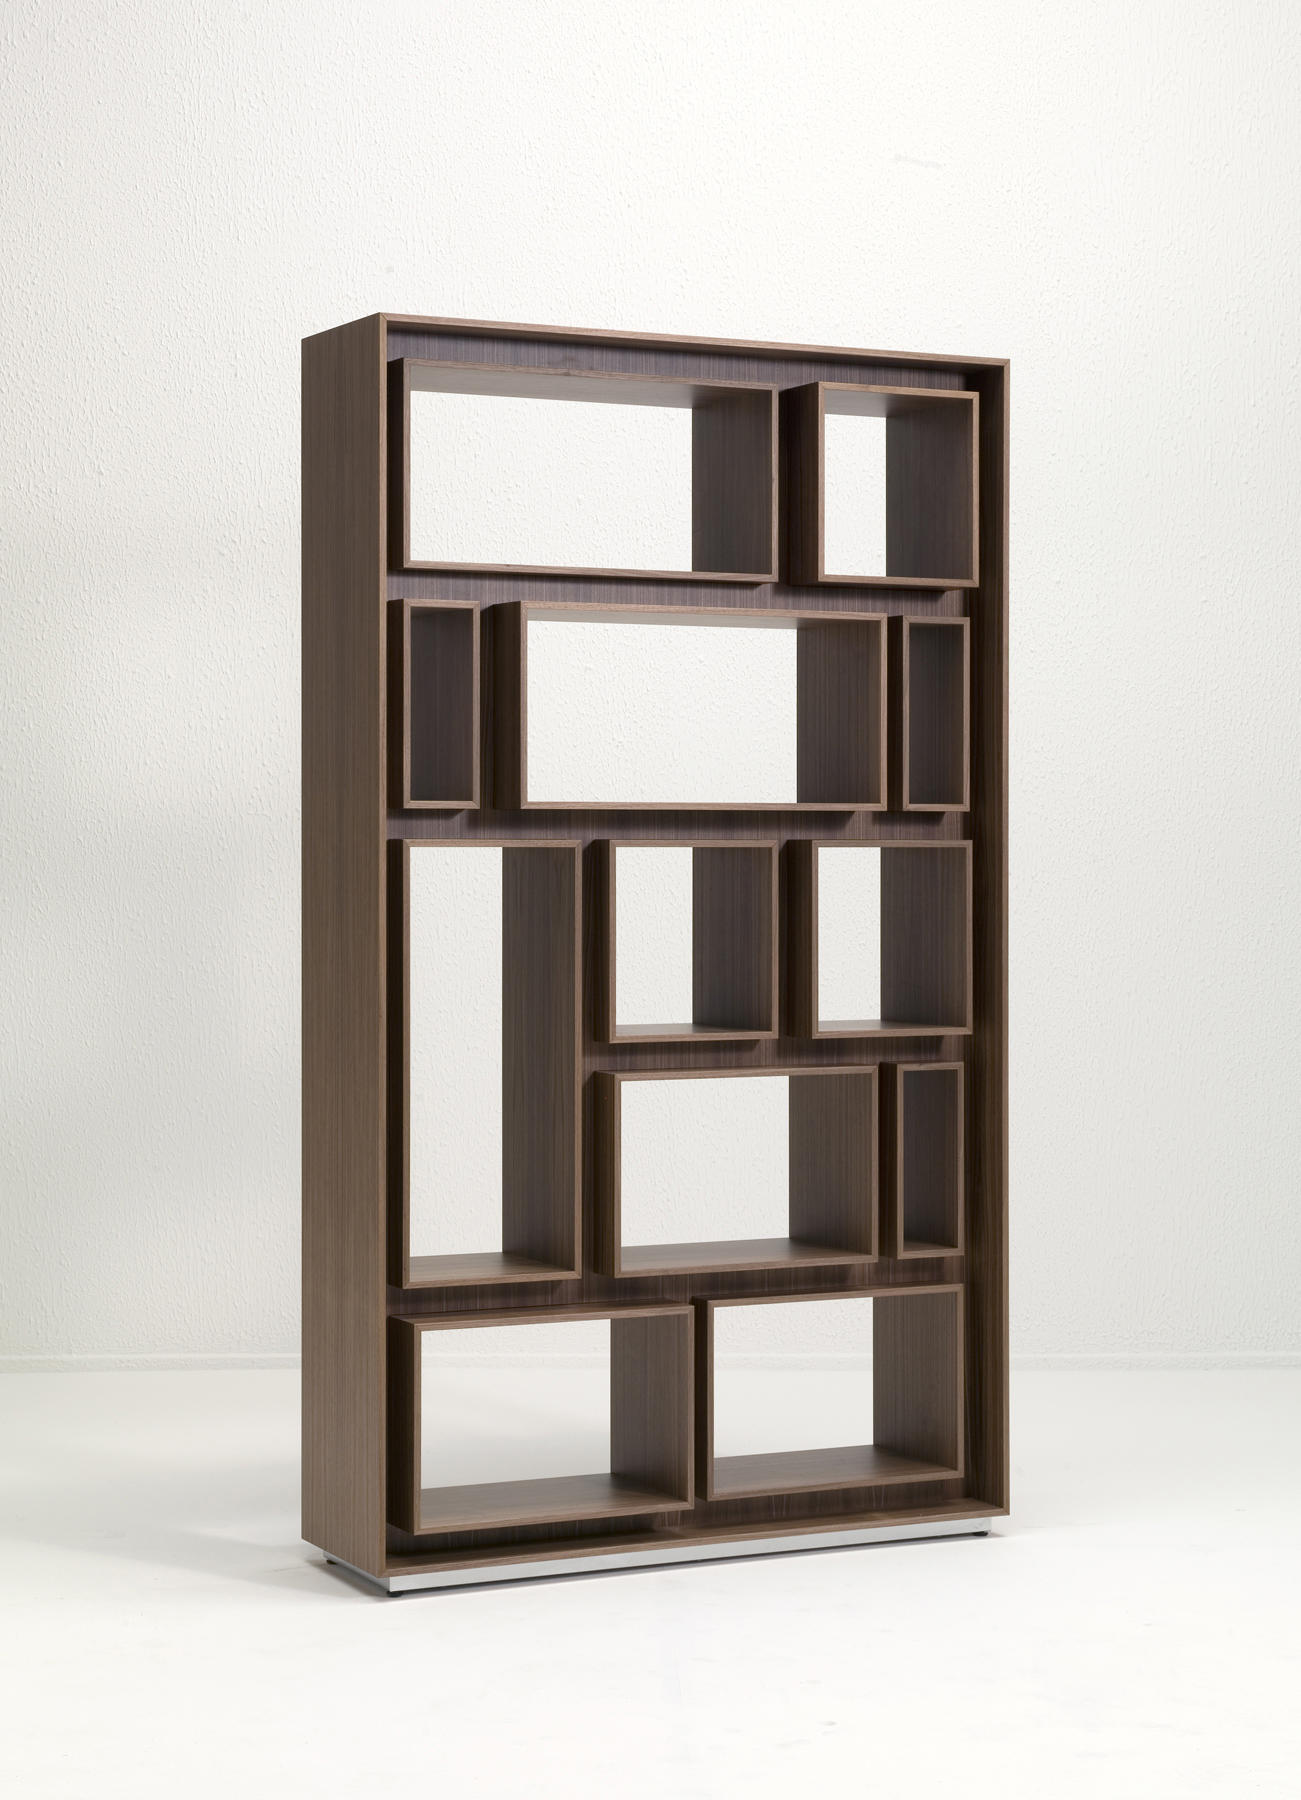 FIRST - Shelving from Porada | Architonic